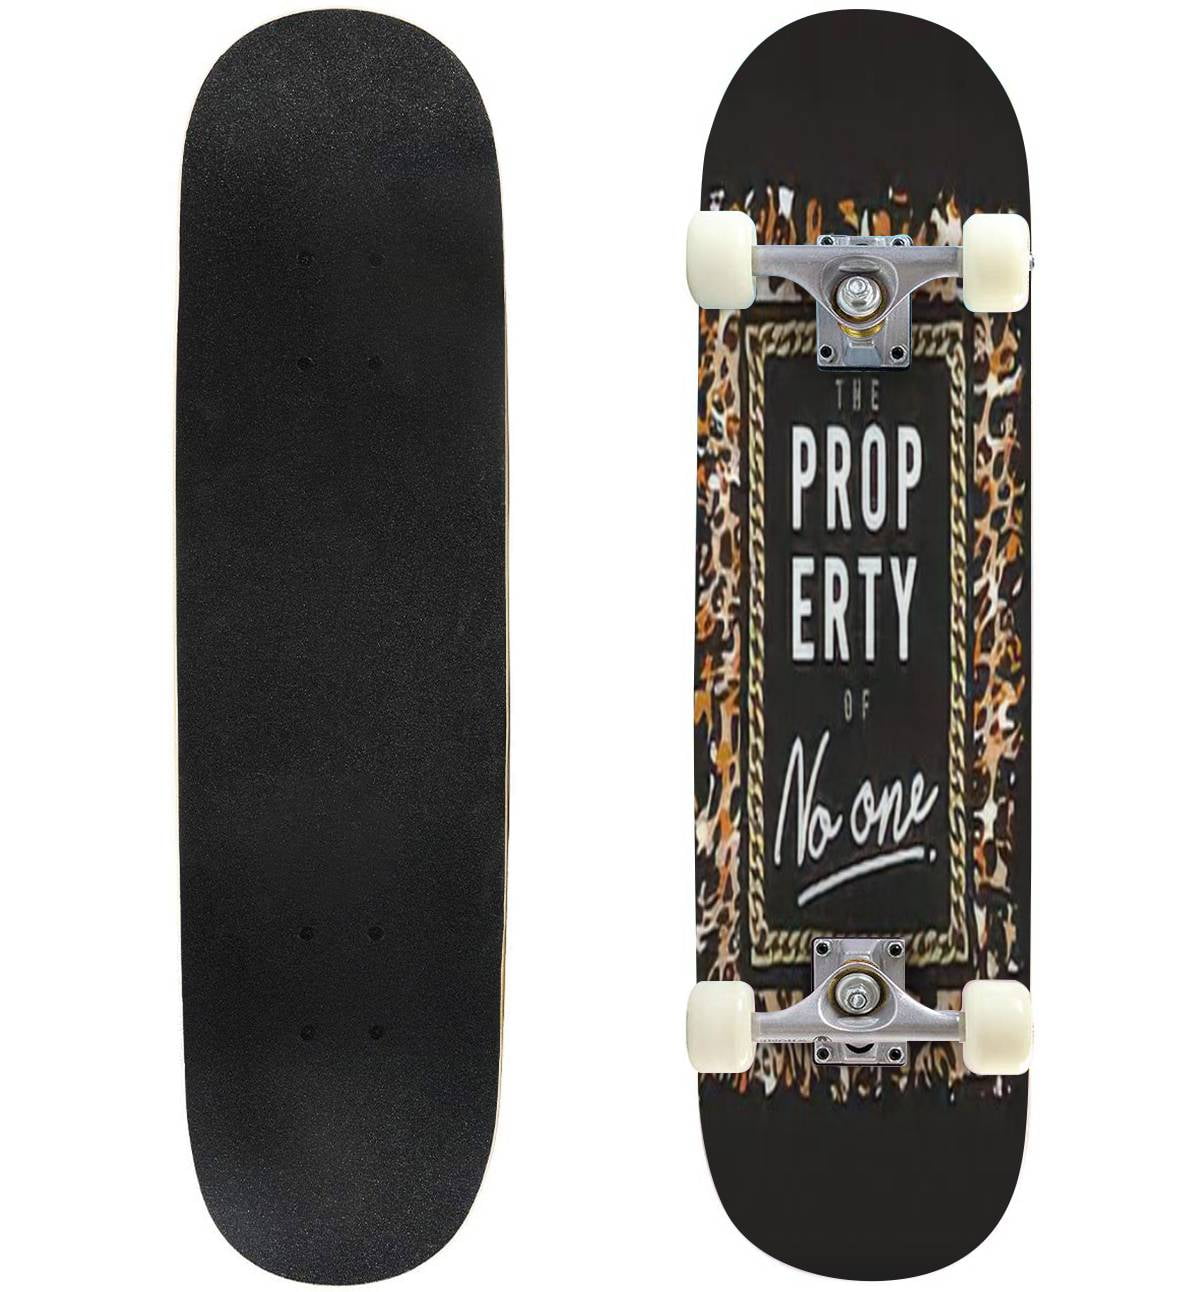 typography slogan on leopard skin with chain lace frame on black Outdoor Longboards 31"x8" Pro Complete Skate Board Cruiser - Walmart.com